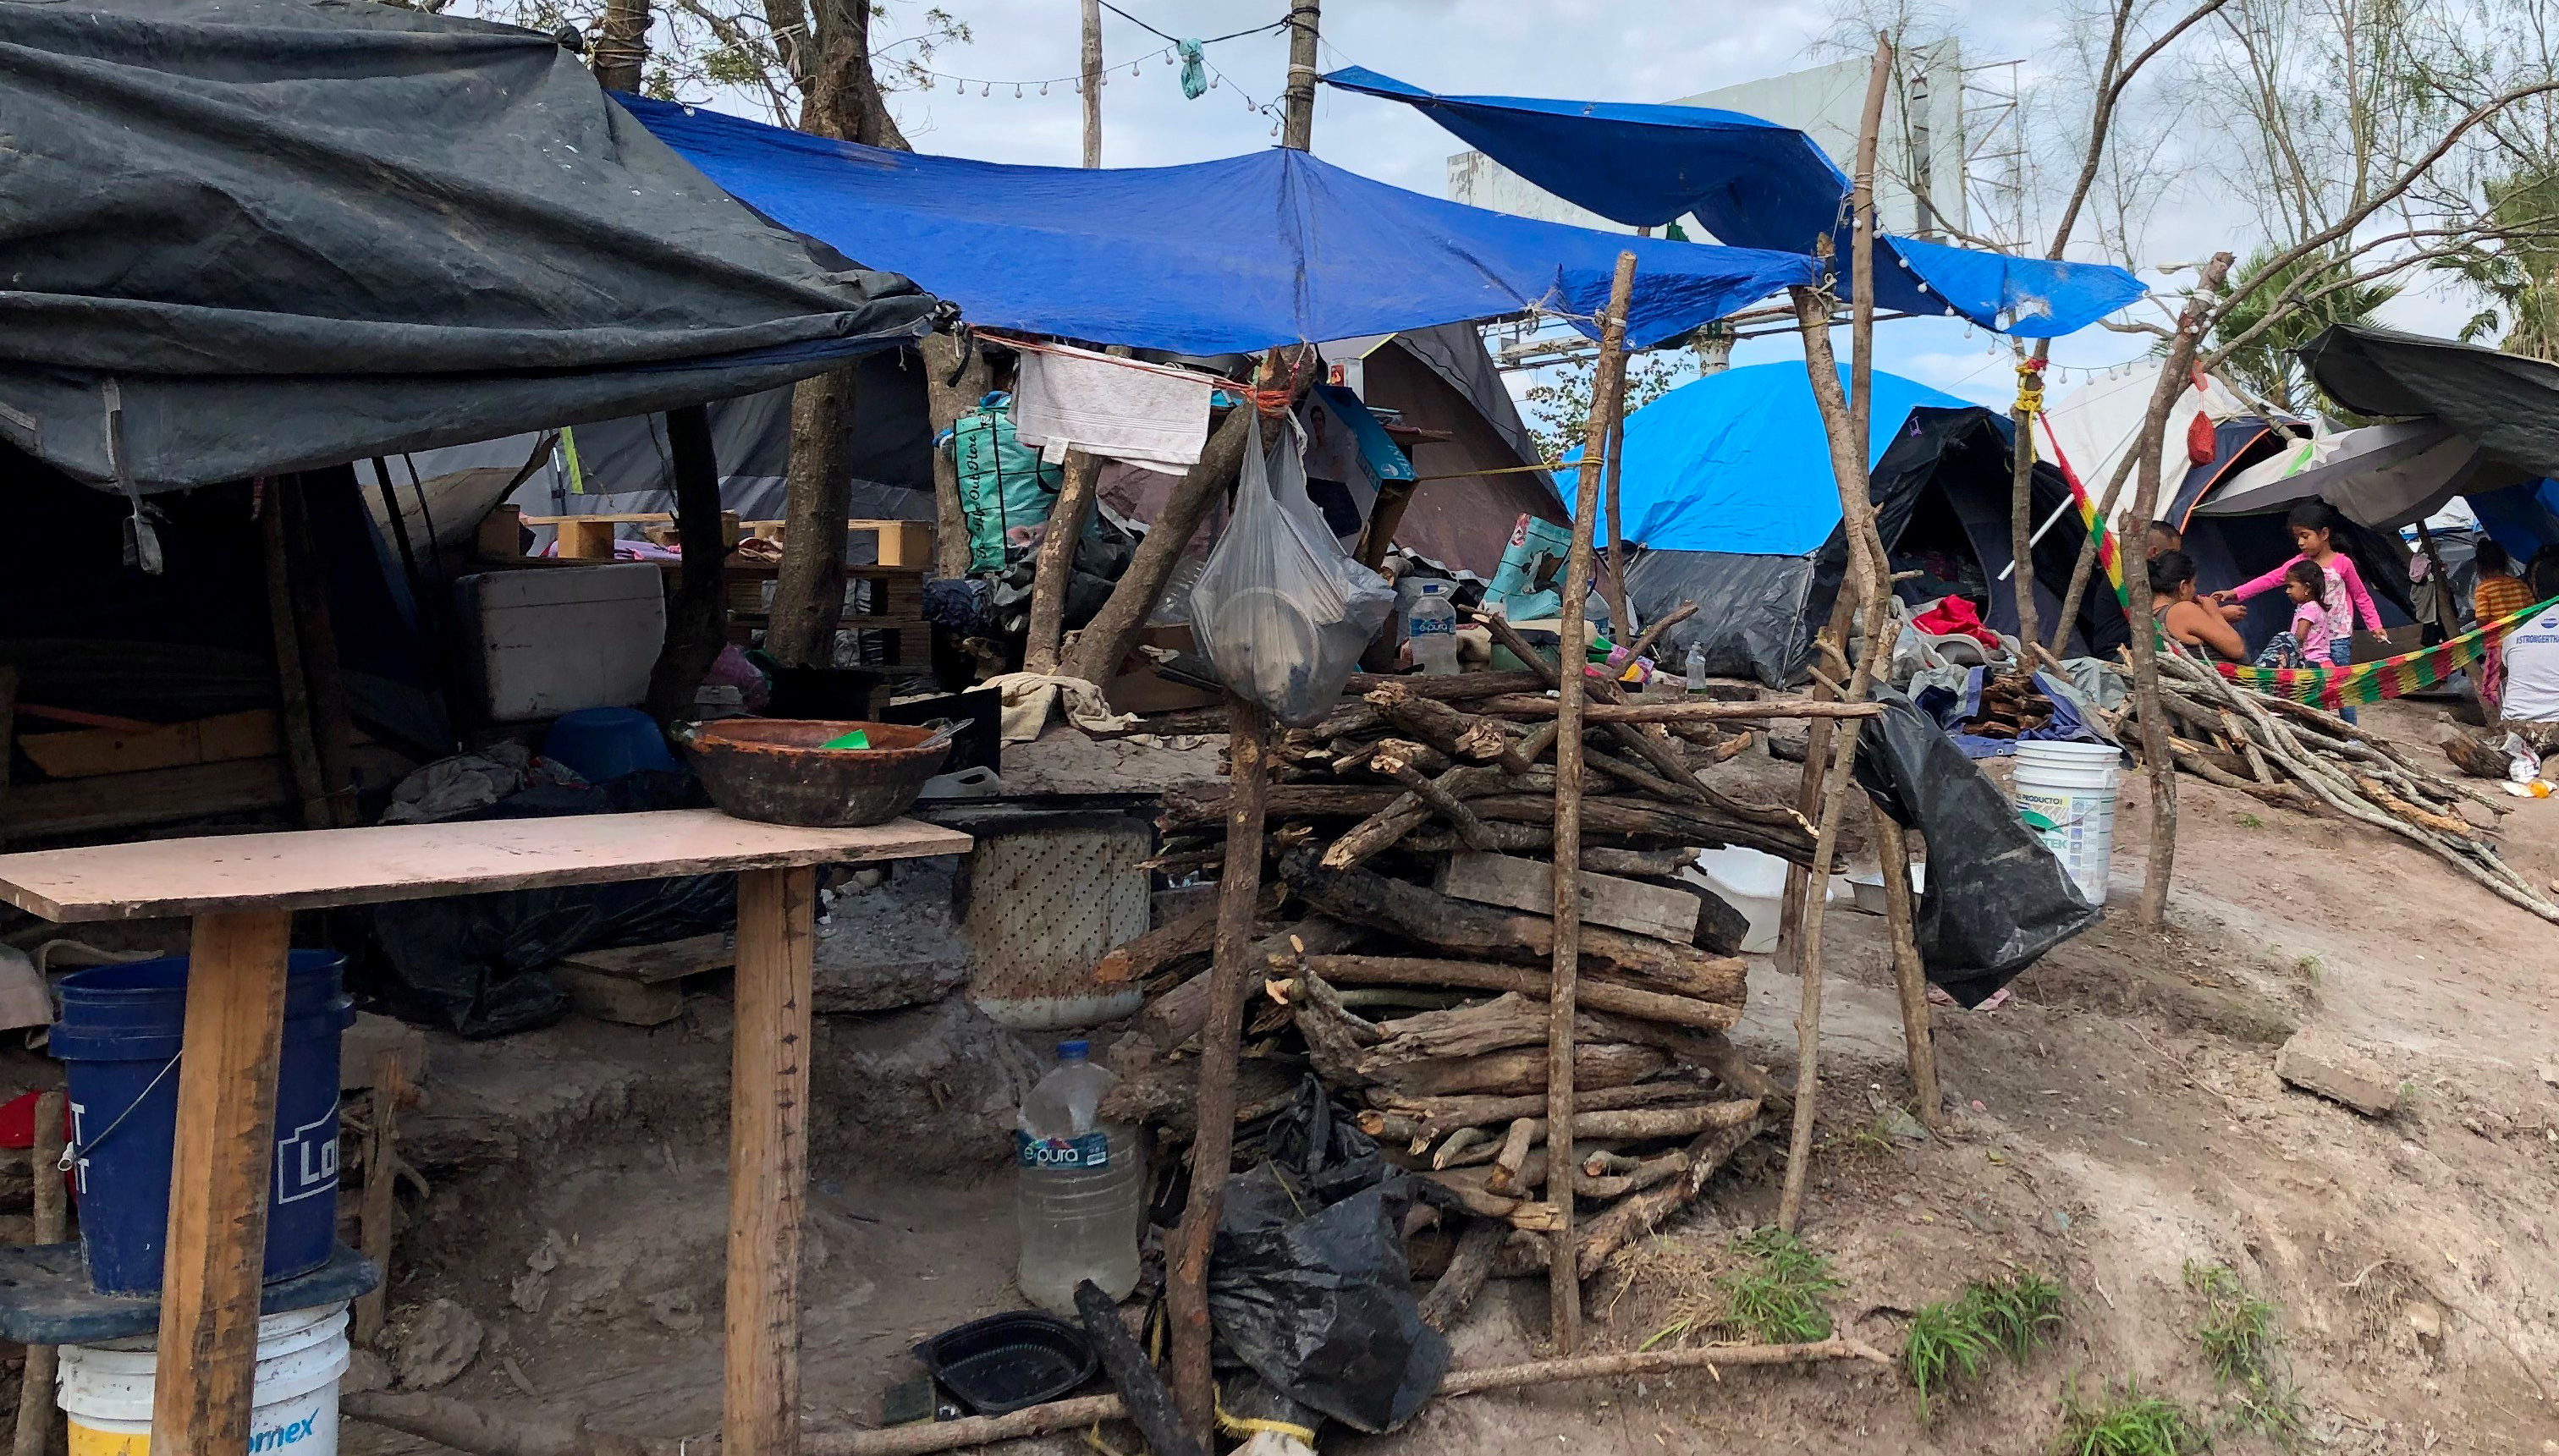 A view of asylum-seekers campsites in Matamoros, Mexico